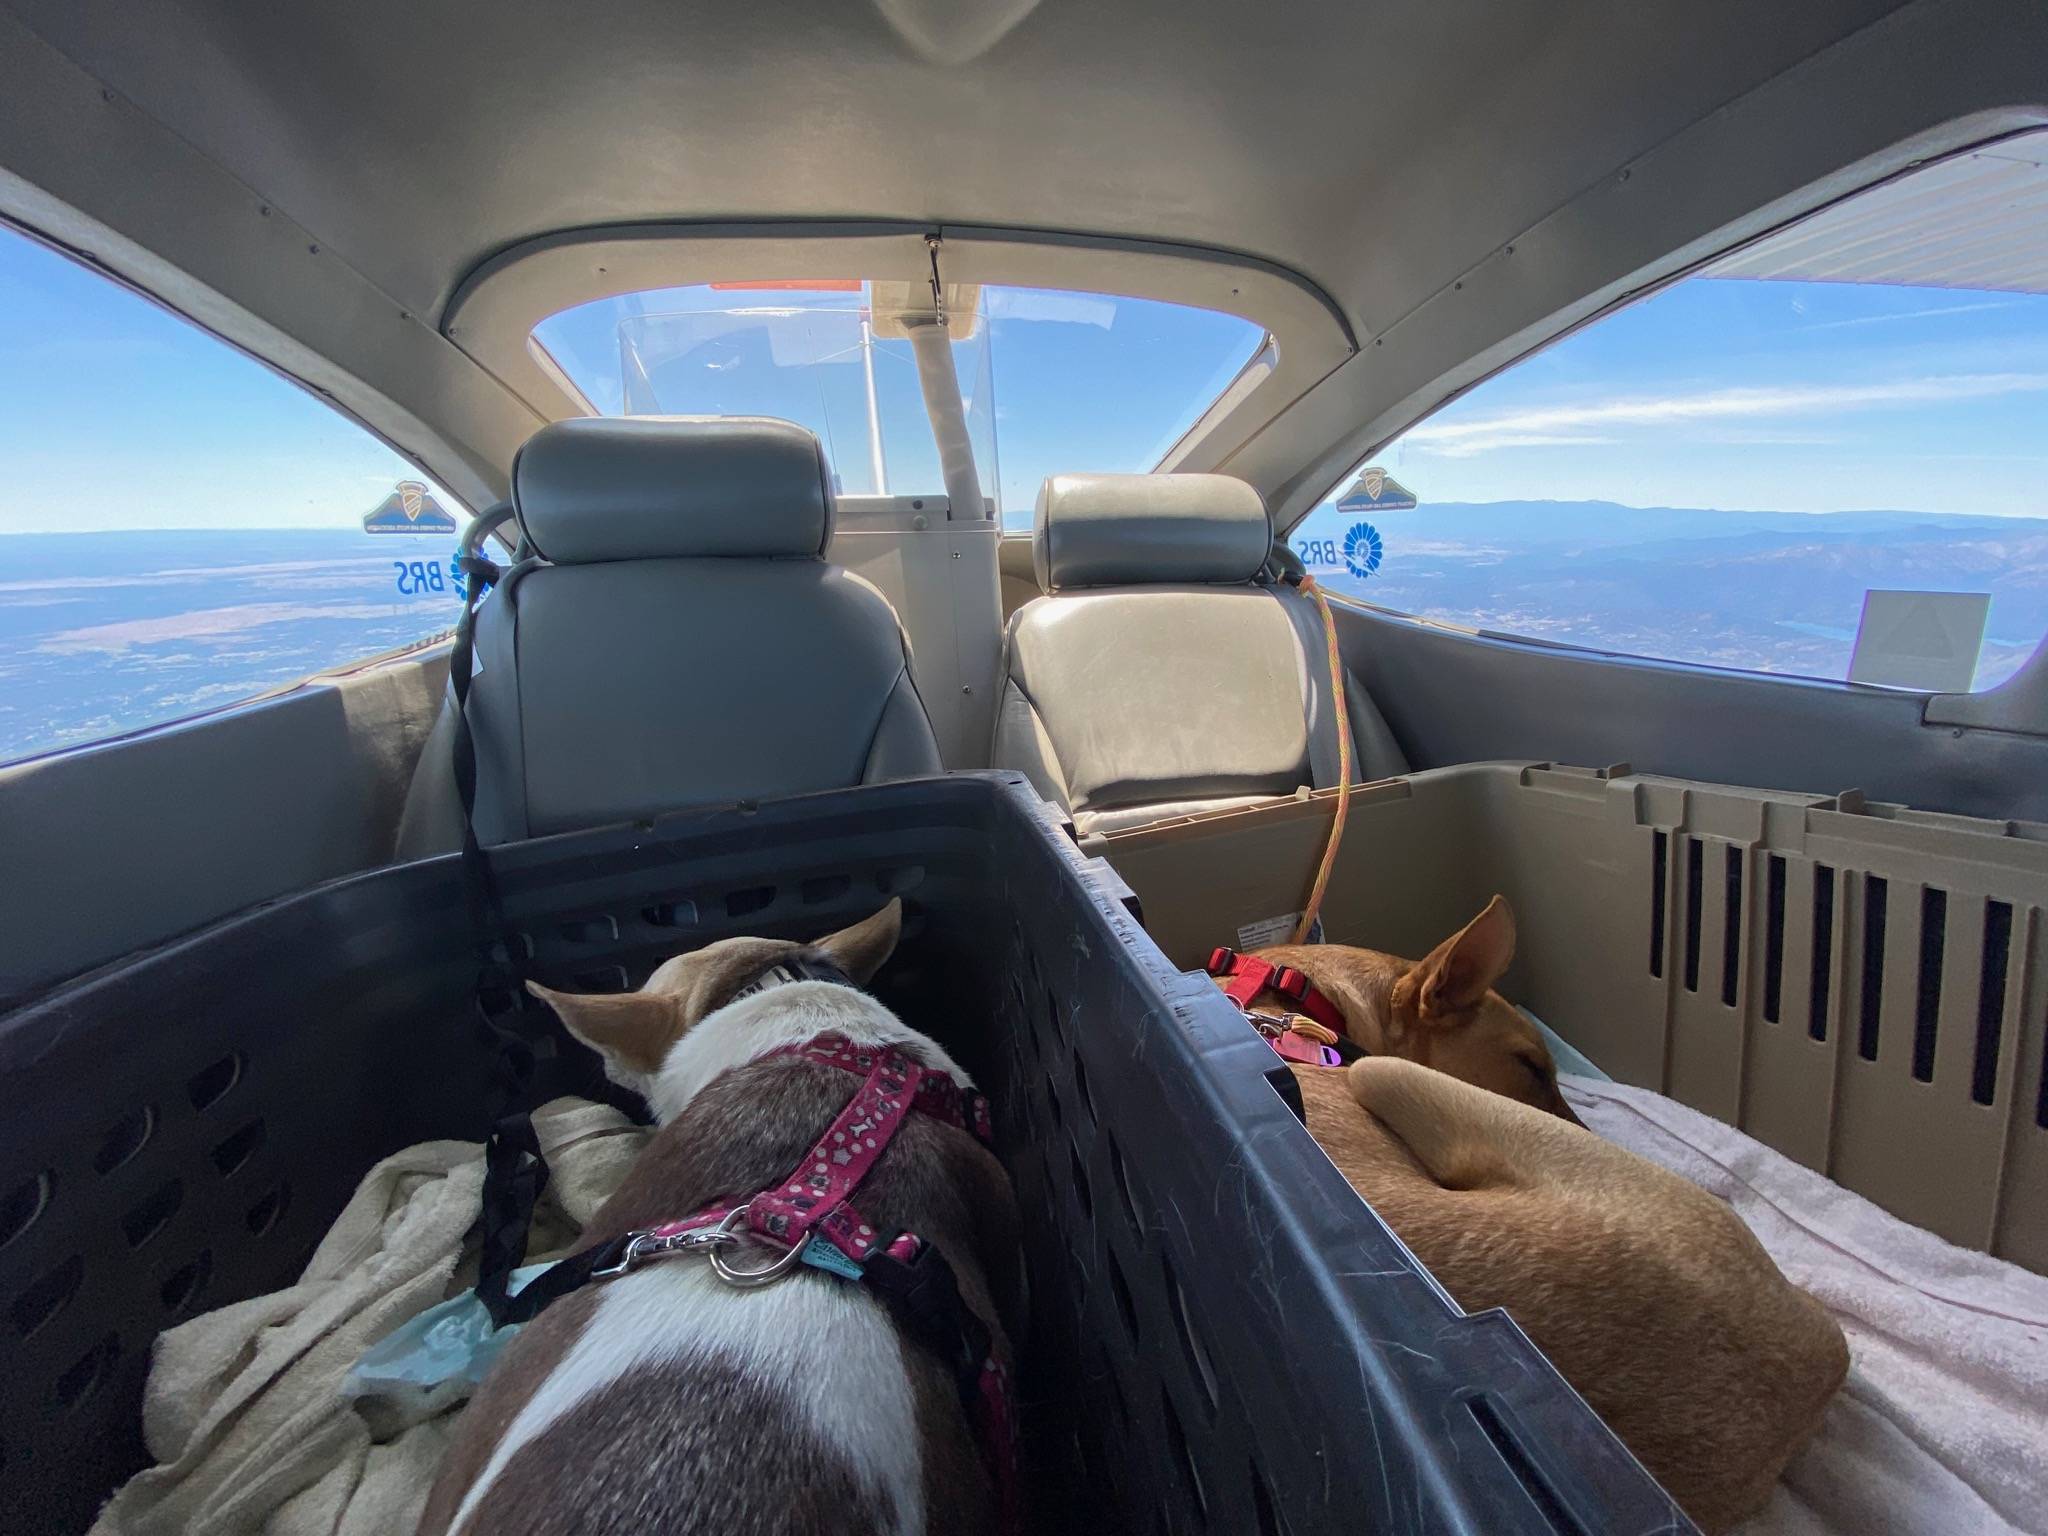 Up in the air, these two rescue dogs did just fine as they made their way from La Paz, Mexico, to Renton, Washington. Photo courtesy of Pilots N Paws